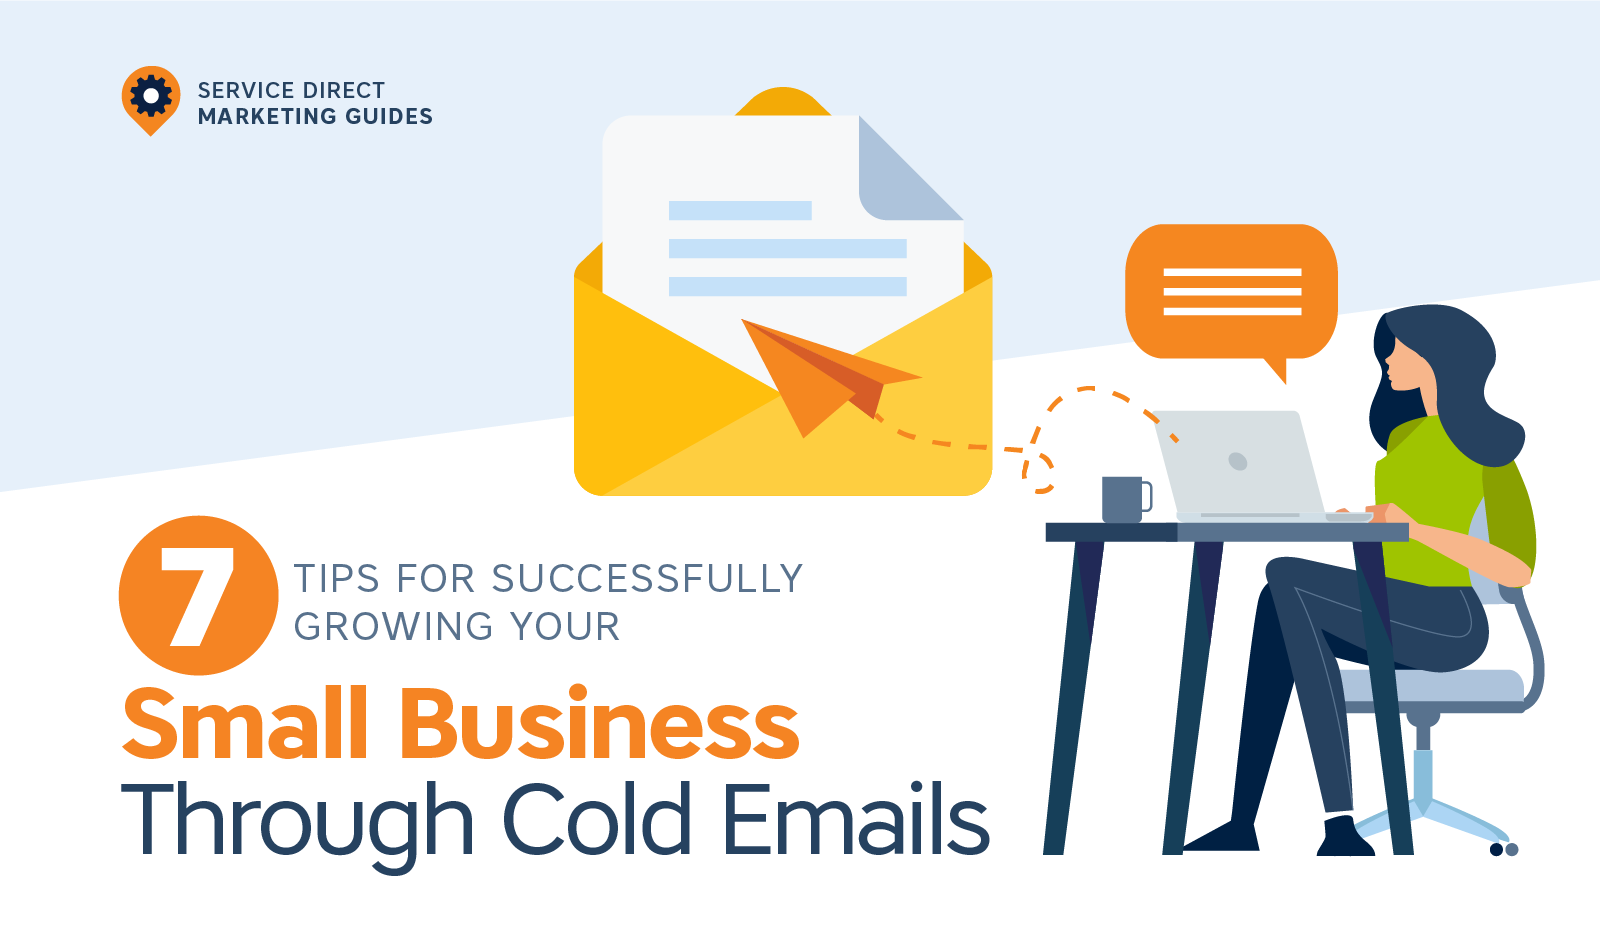 7 Tips for Cold Email Outreach for Small Businesses